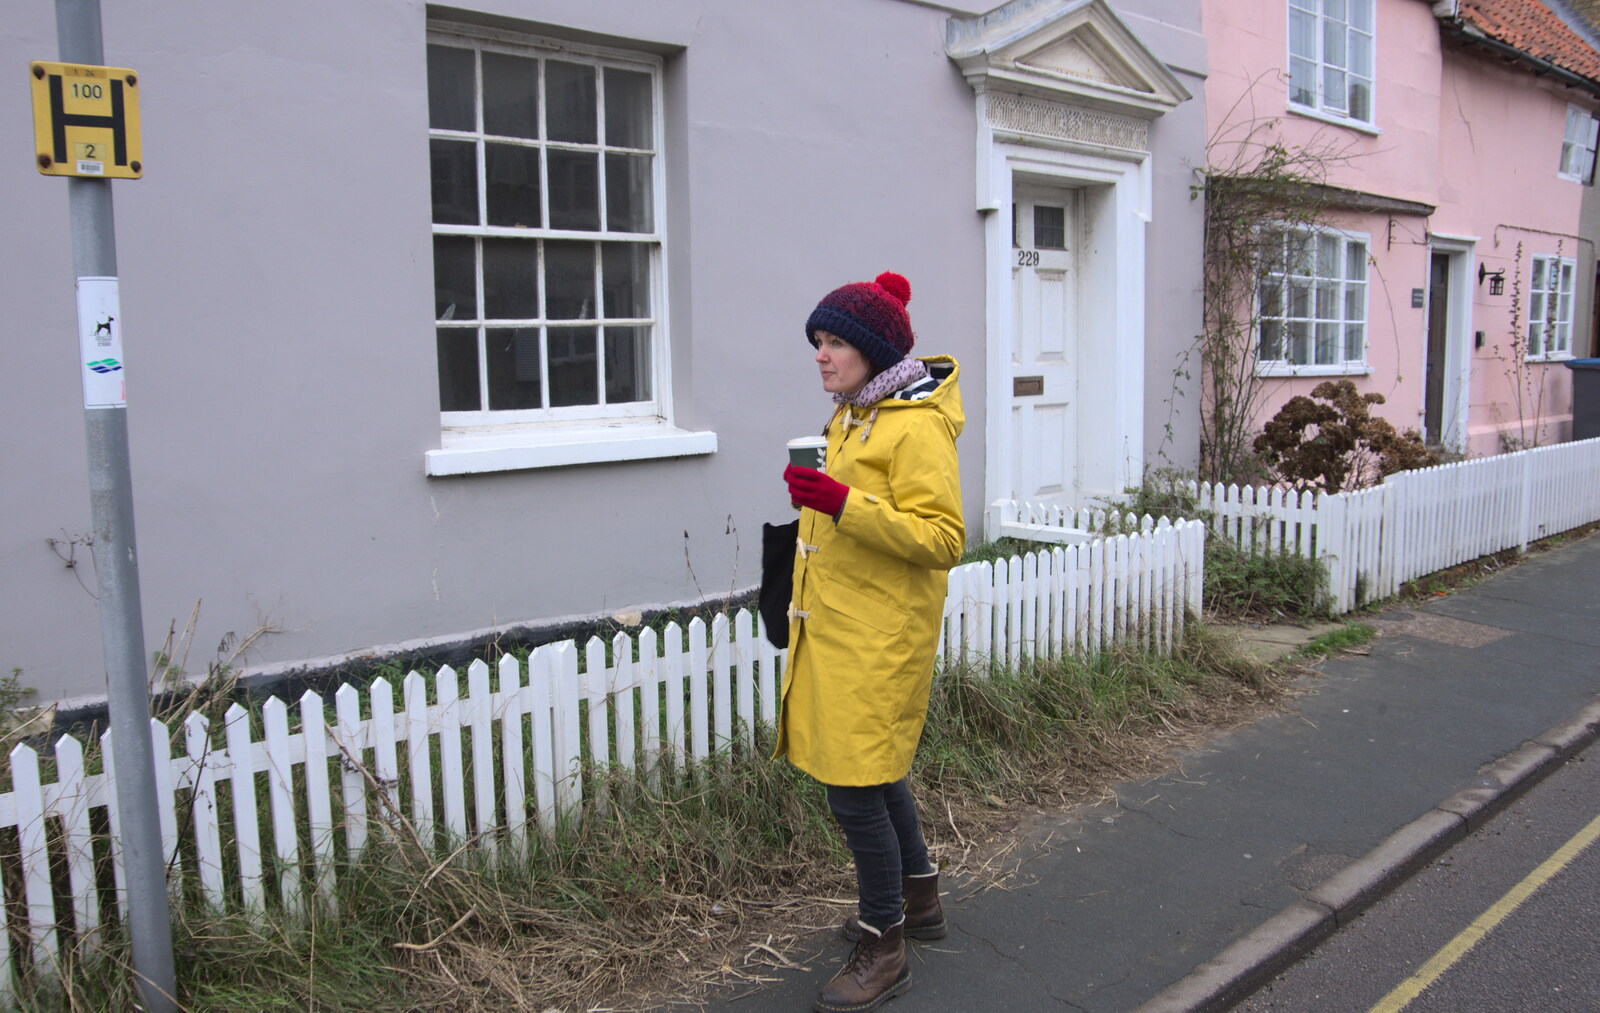 Isobel wanders around with a take-away coffee from A Postcard from Aldeburgh, Suffolk - 6th January 2019